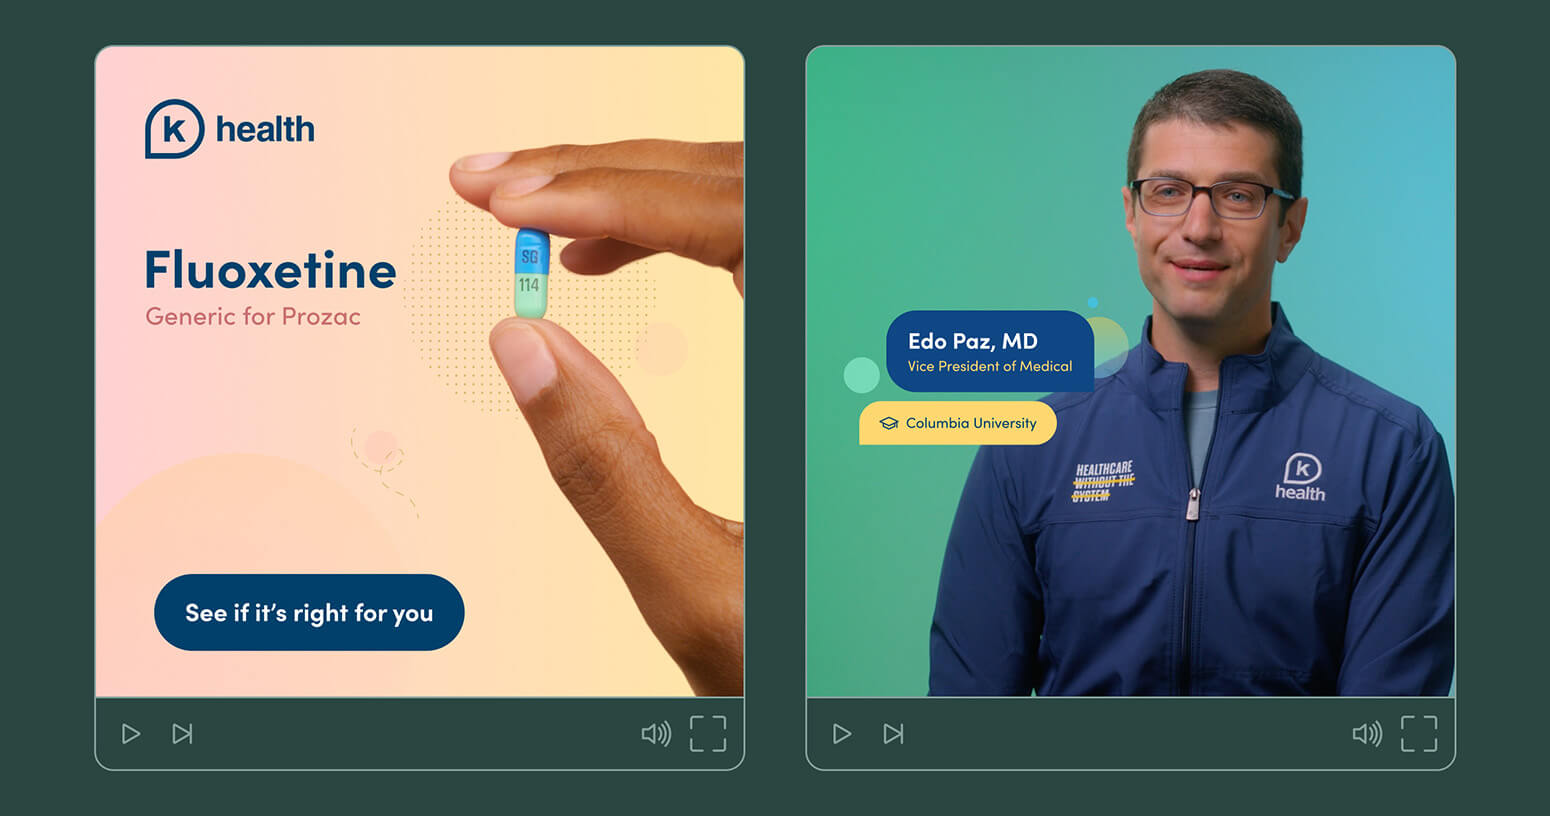 2 video thumbnails, one of an ad for Fluoxetine and the other of a doctor talking about K Health